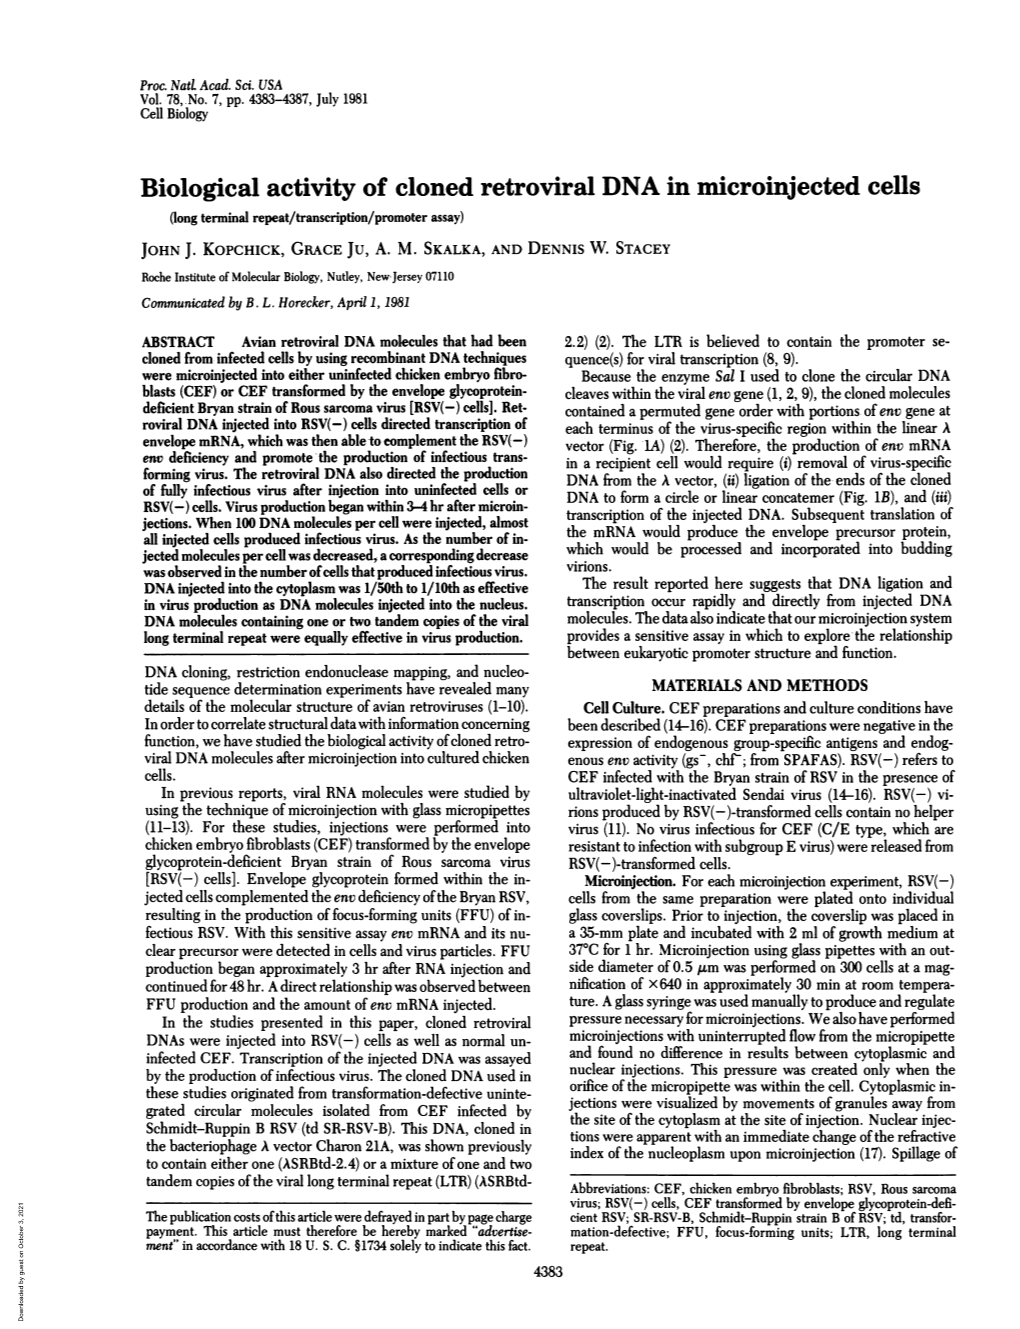 Biological Activity Ofcloned Retroviral DNA in Microinjected Cells